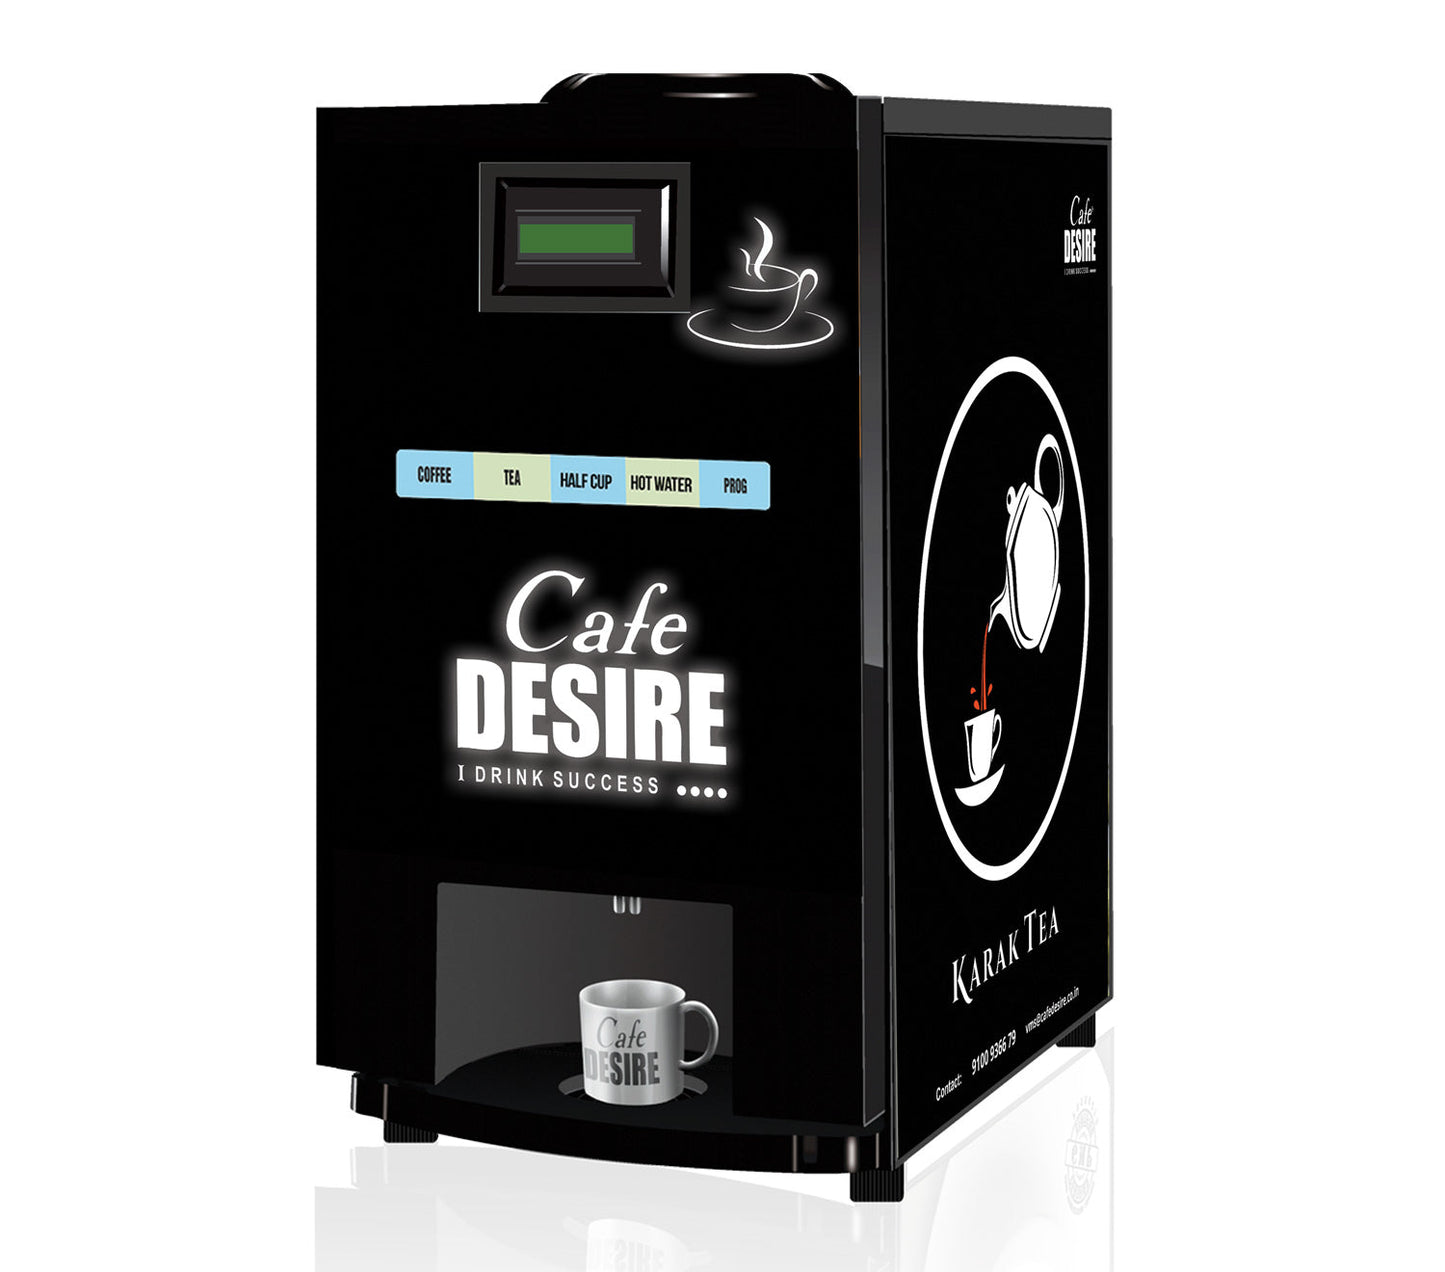 LED Coffee Machine 4 Lane | Four Beverage Options | Fully Automatic Tea & Coffee Vending Machine | For Offices, Shops and Smart Homes | Make 4 Varieties of Coffee Tea with Premix | No Milk, Tea, Coffee Powder Required